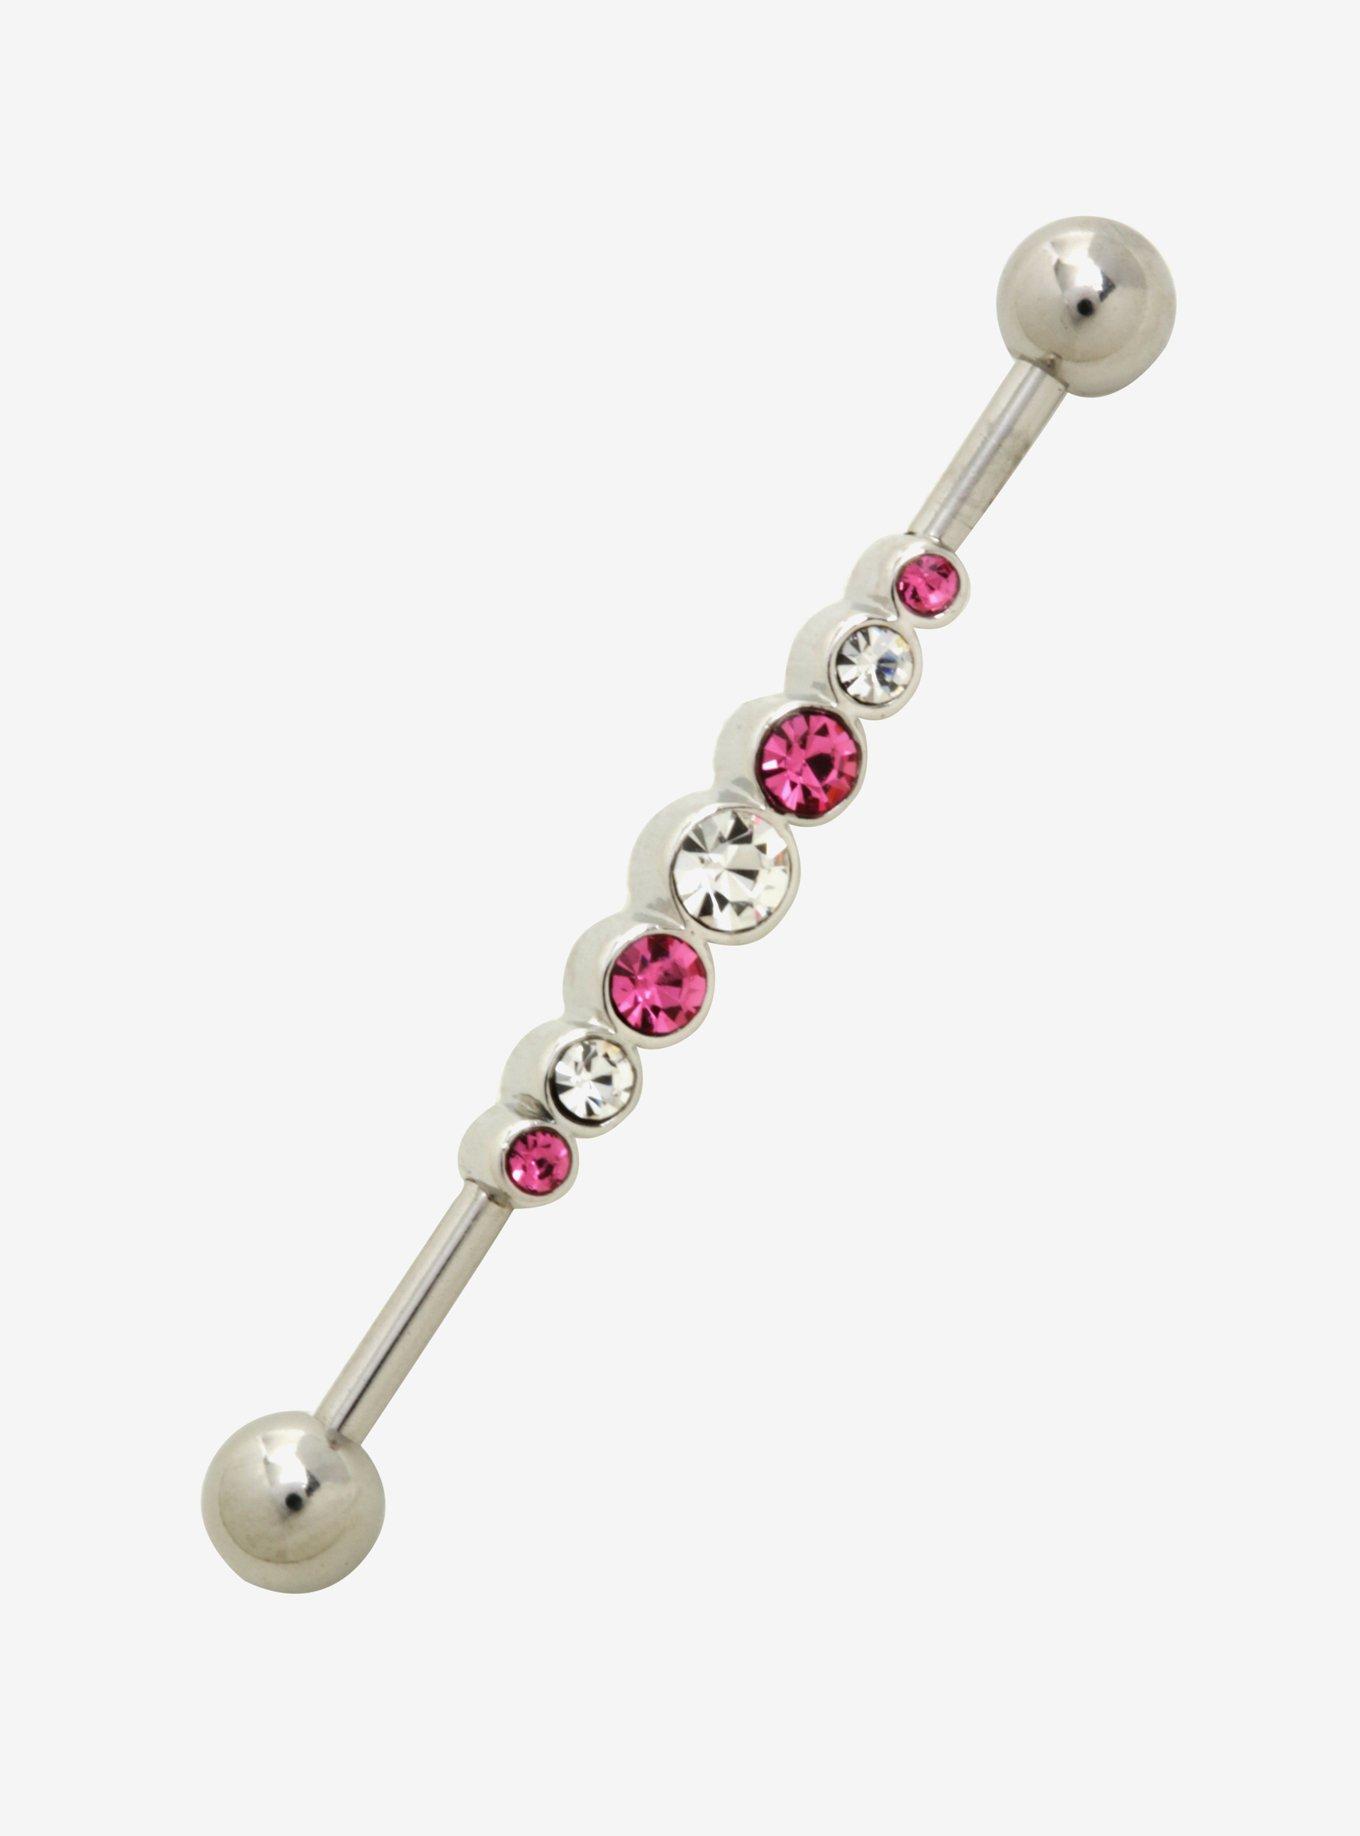 14G 1 1/2 Steel Pink & White CZ Industrial Barbell, , hi-res